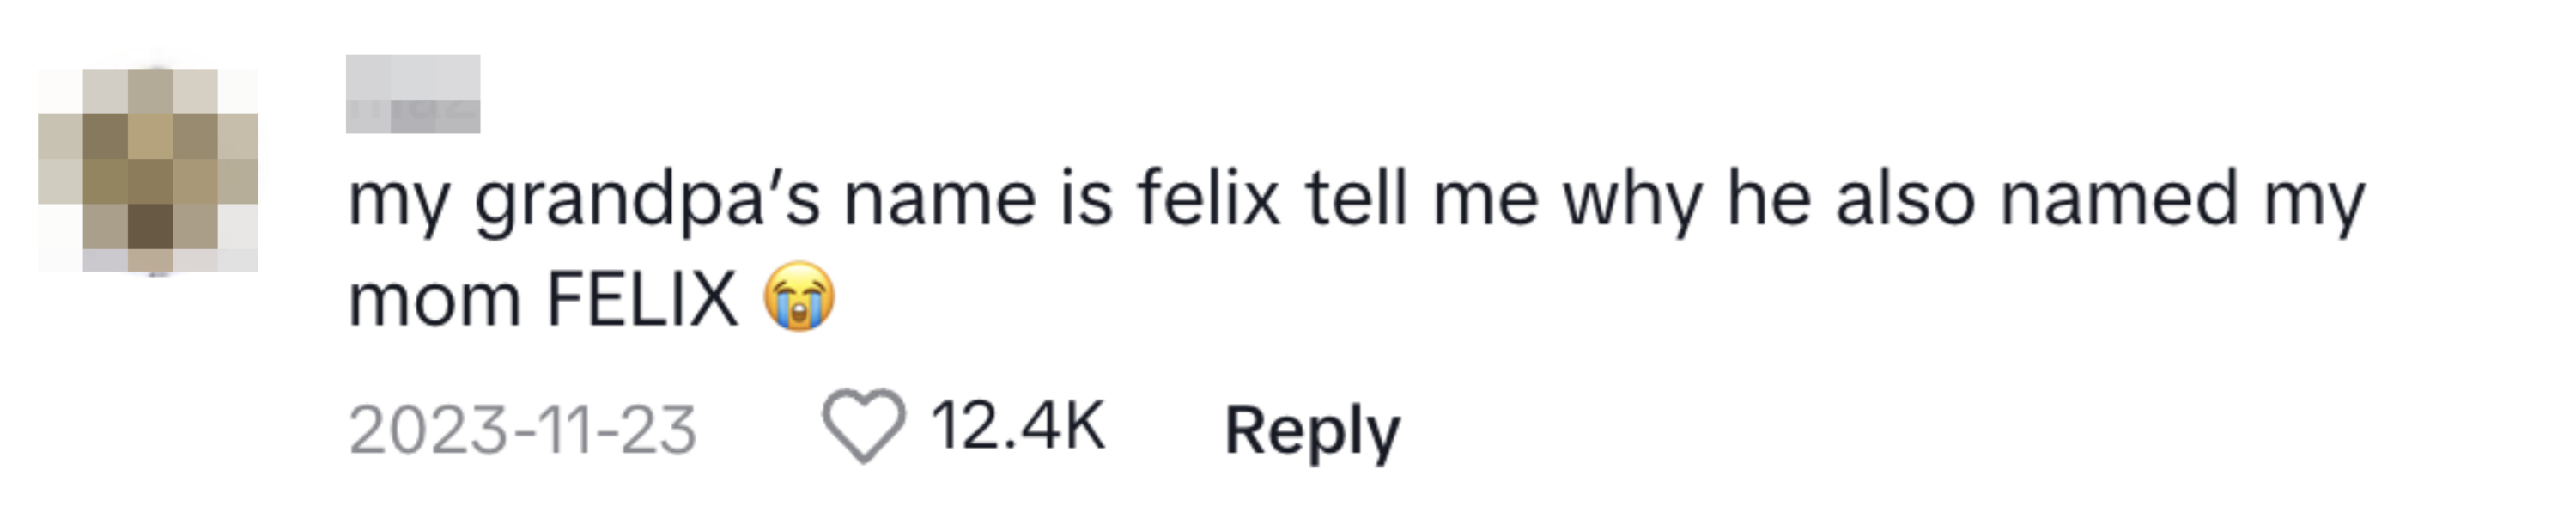 A commenter saying that their grandpa Felix also named their mom Felix